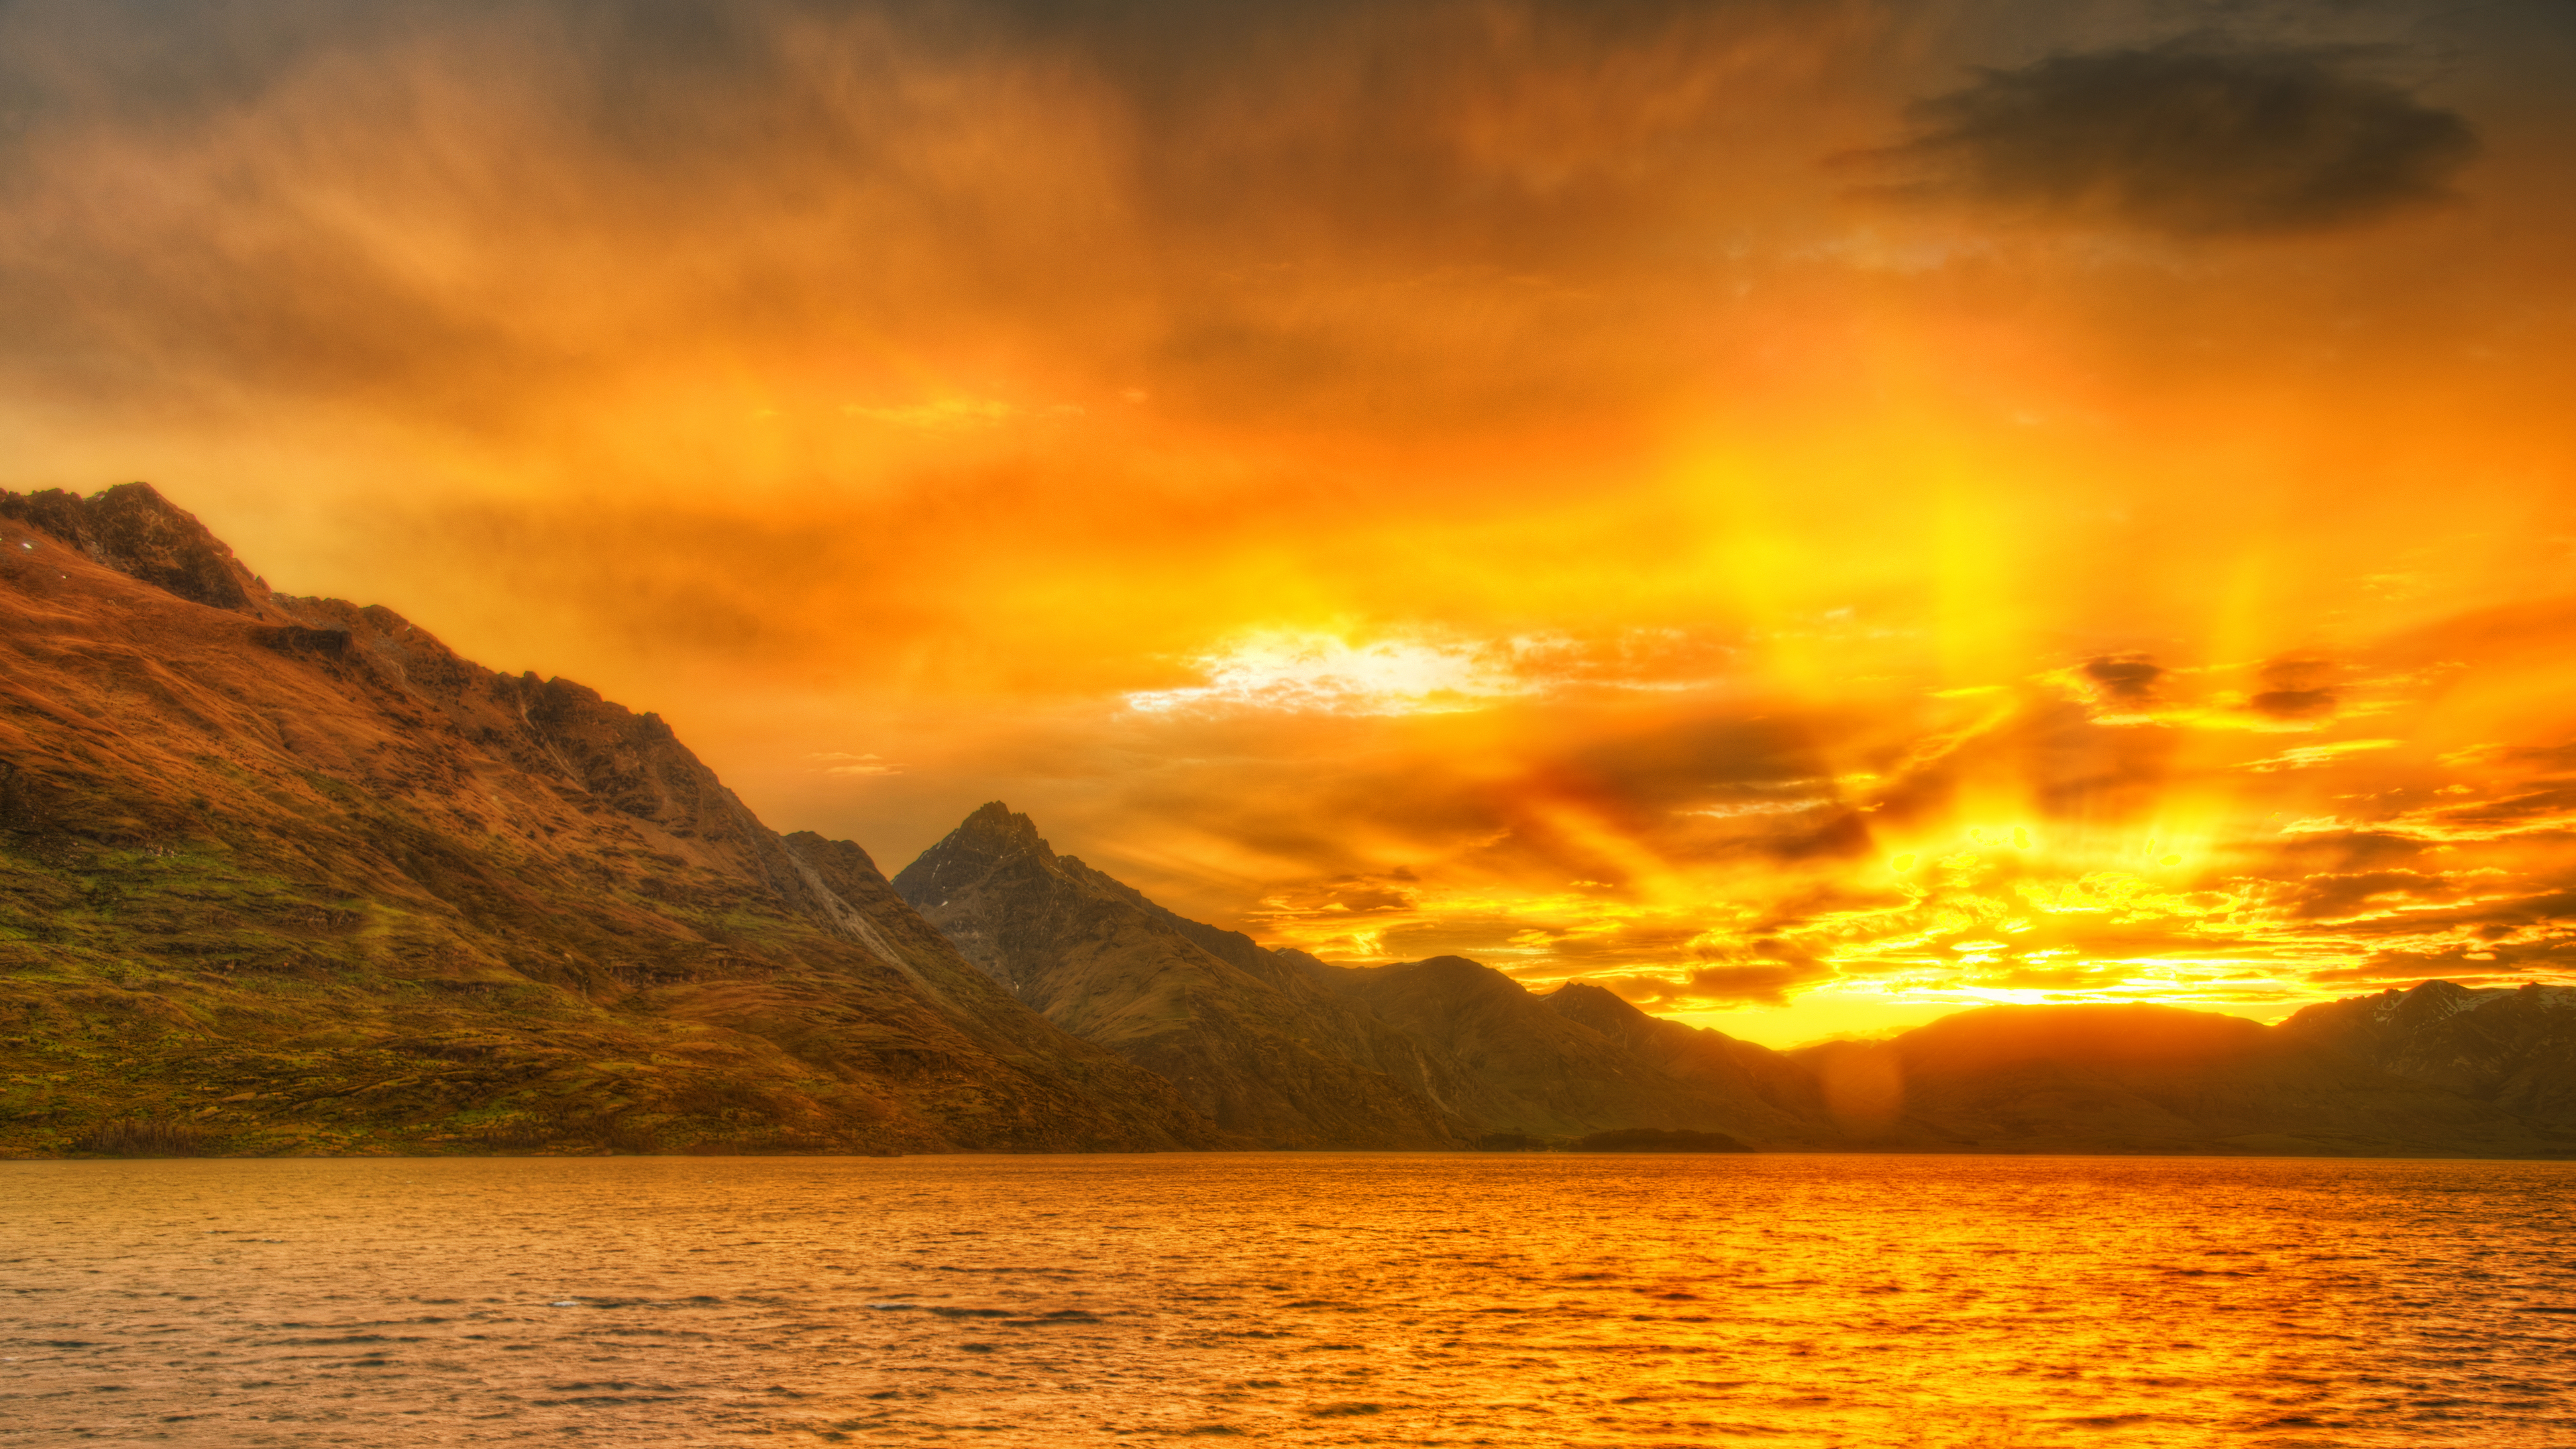 General 3840x2160 landscape 4K New Zealand sunset glow clouds water nature mountains sky